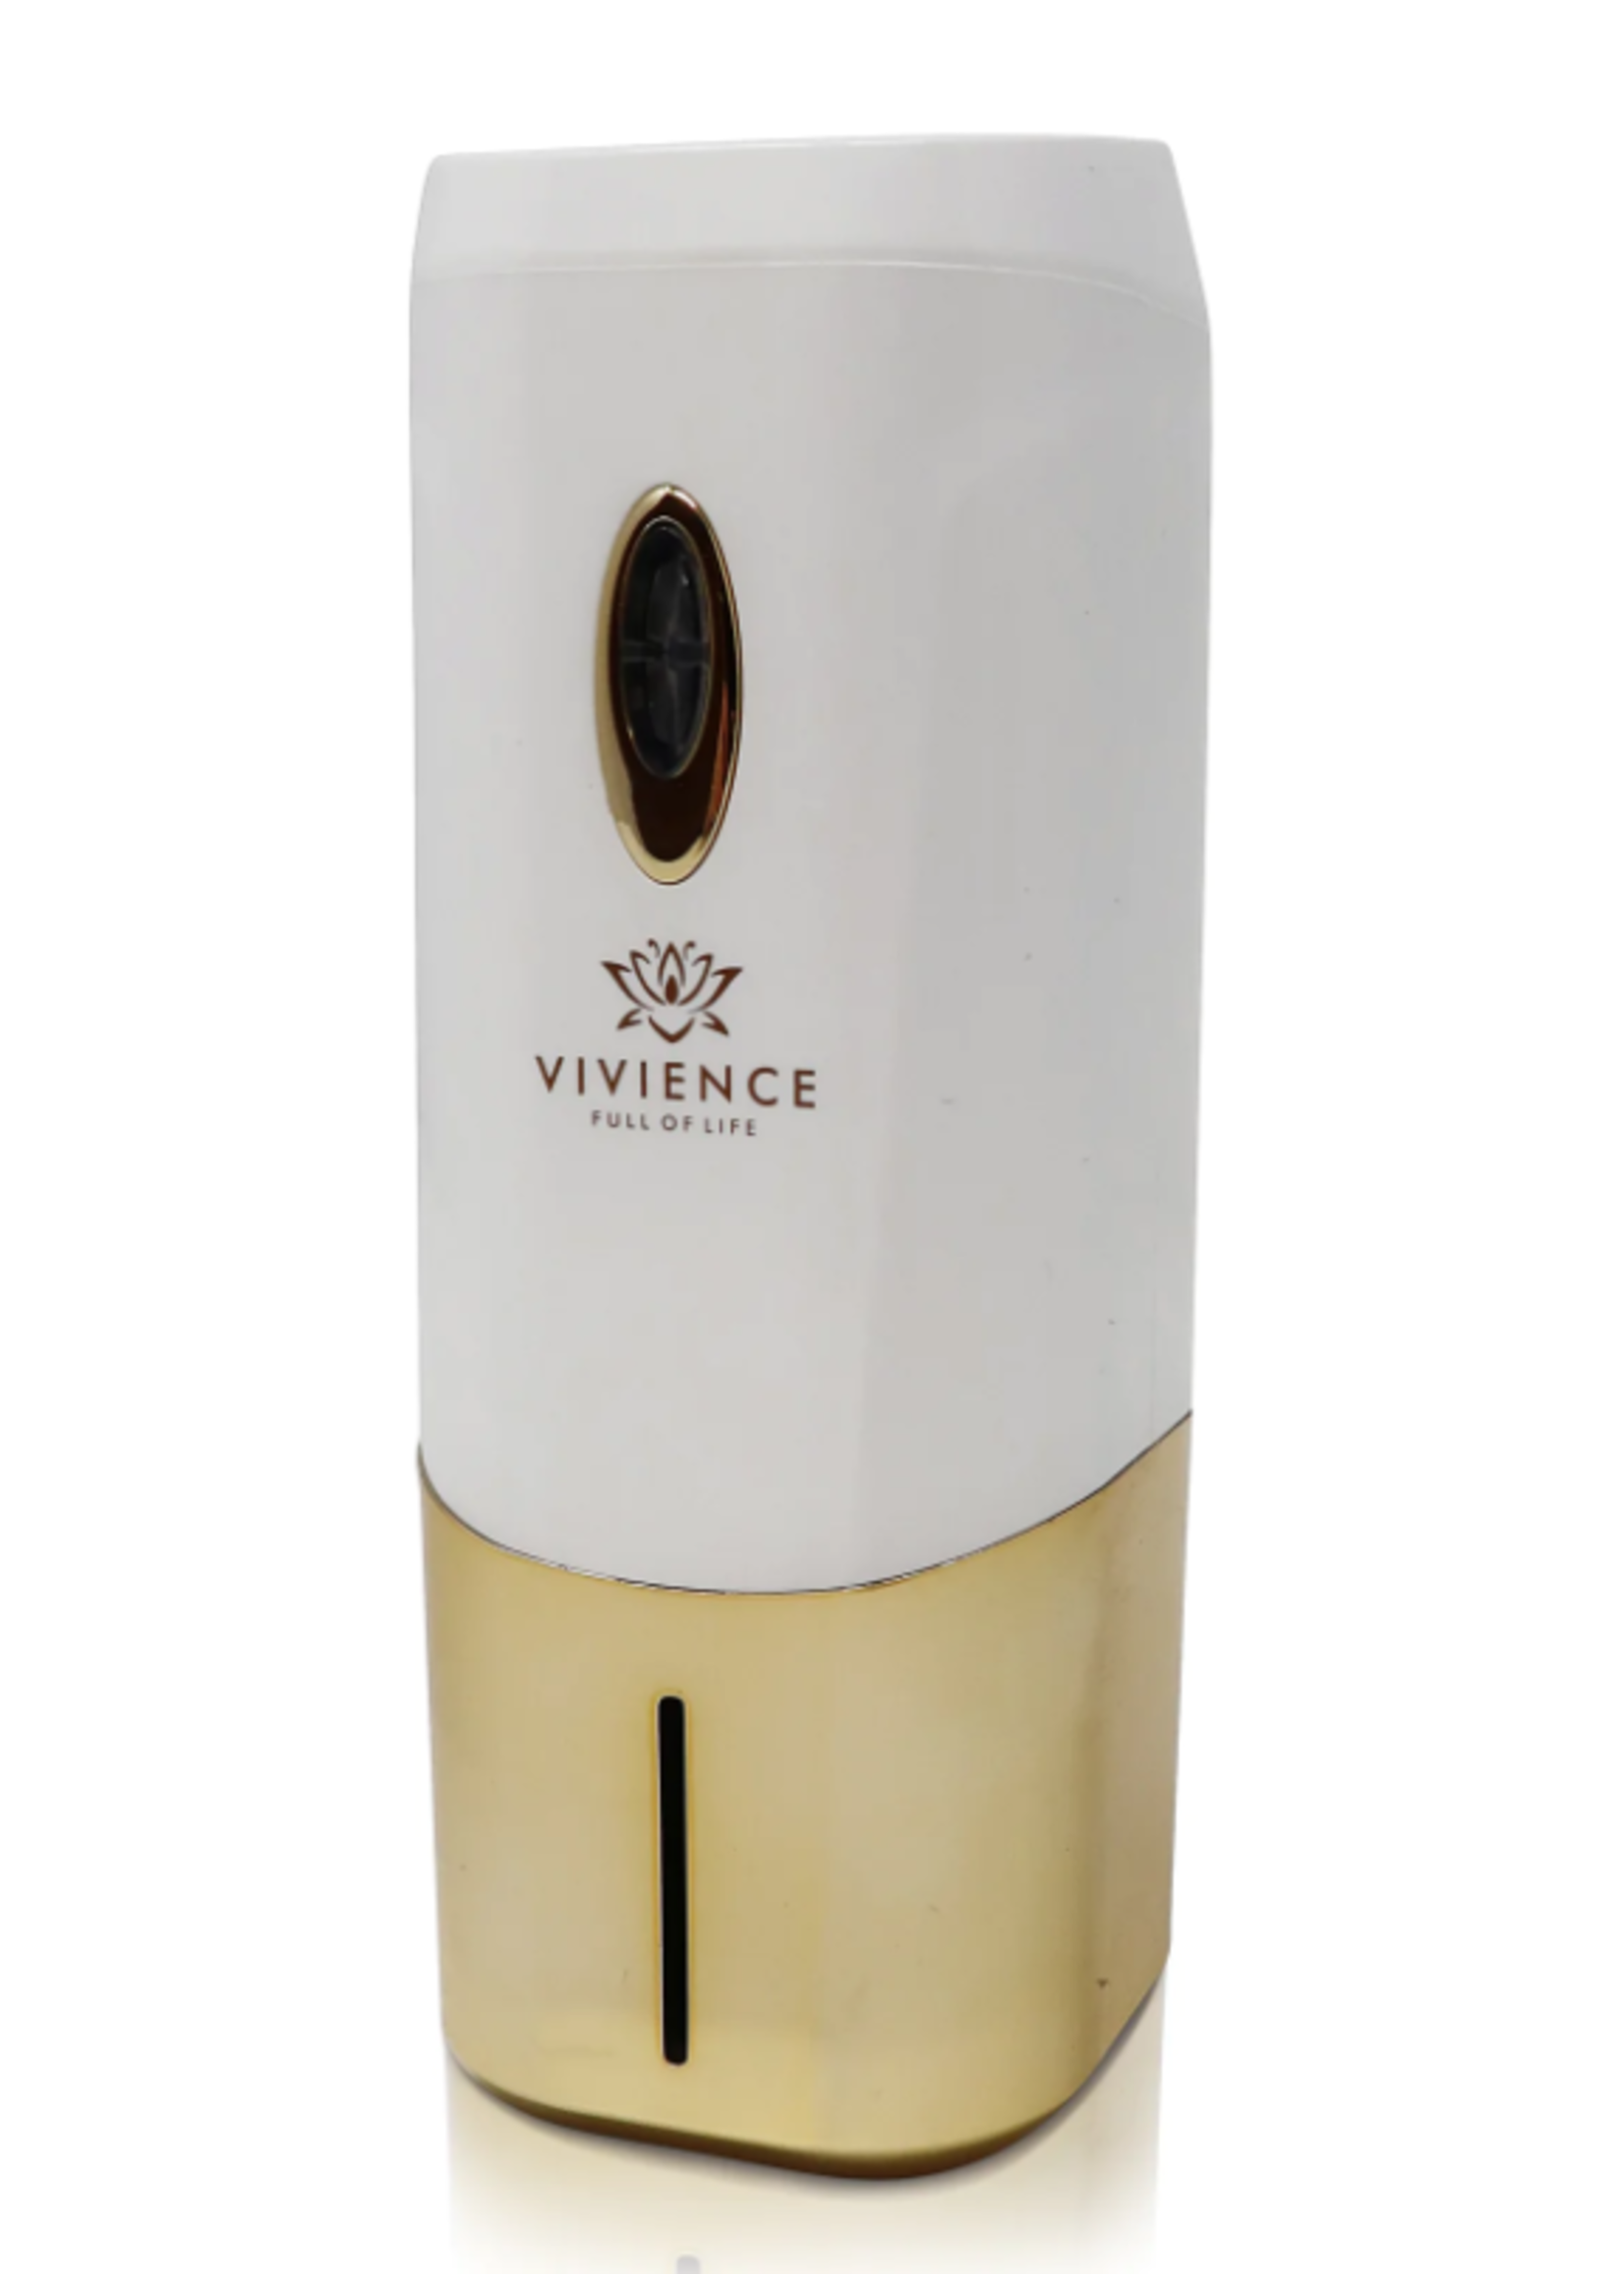 Vivience Fol Inc. White And Gold Battery Operated Diffuser, "Zen Tea" Scent